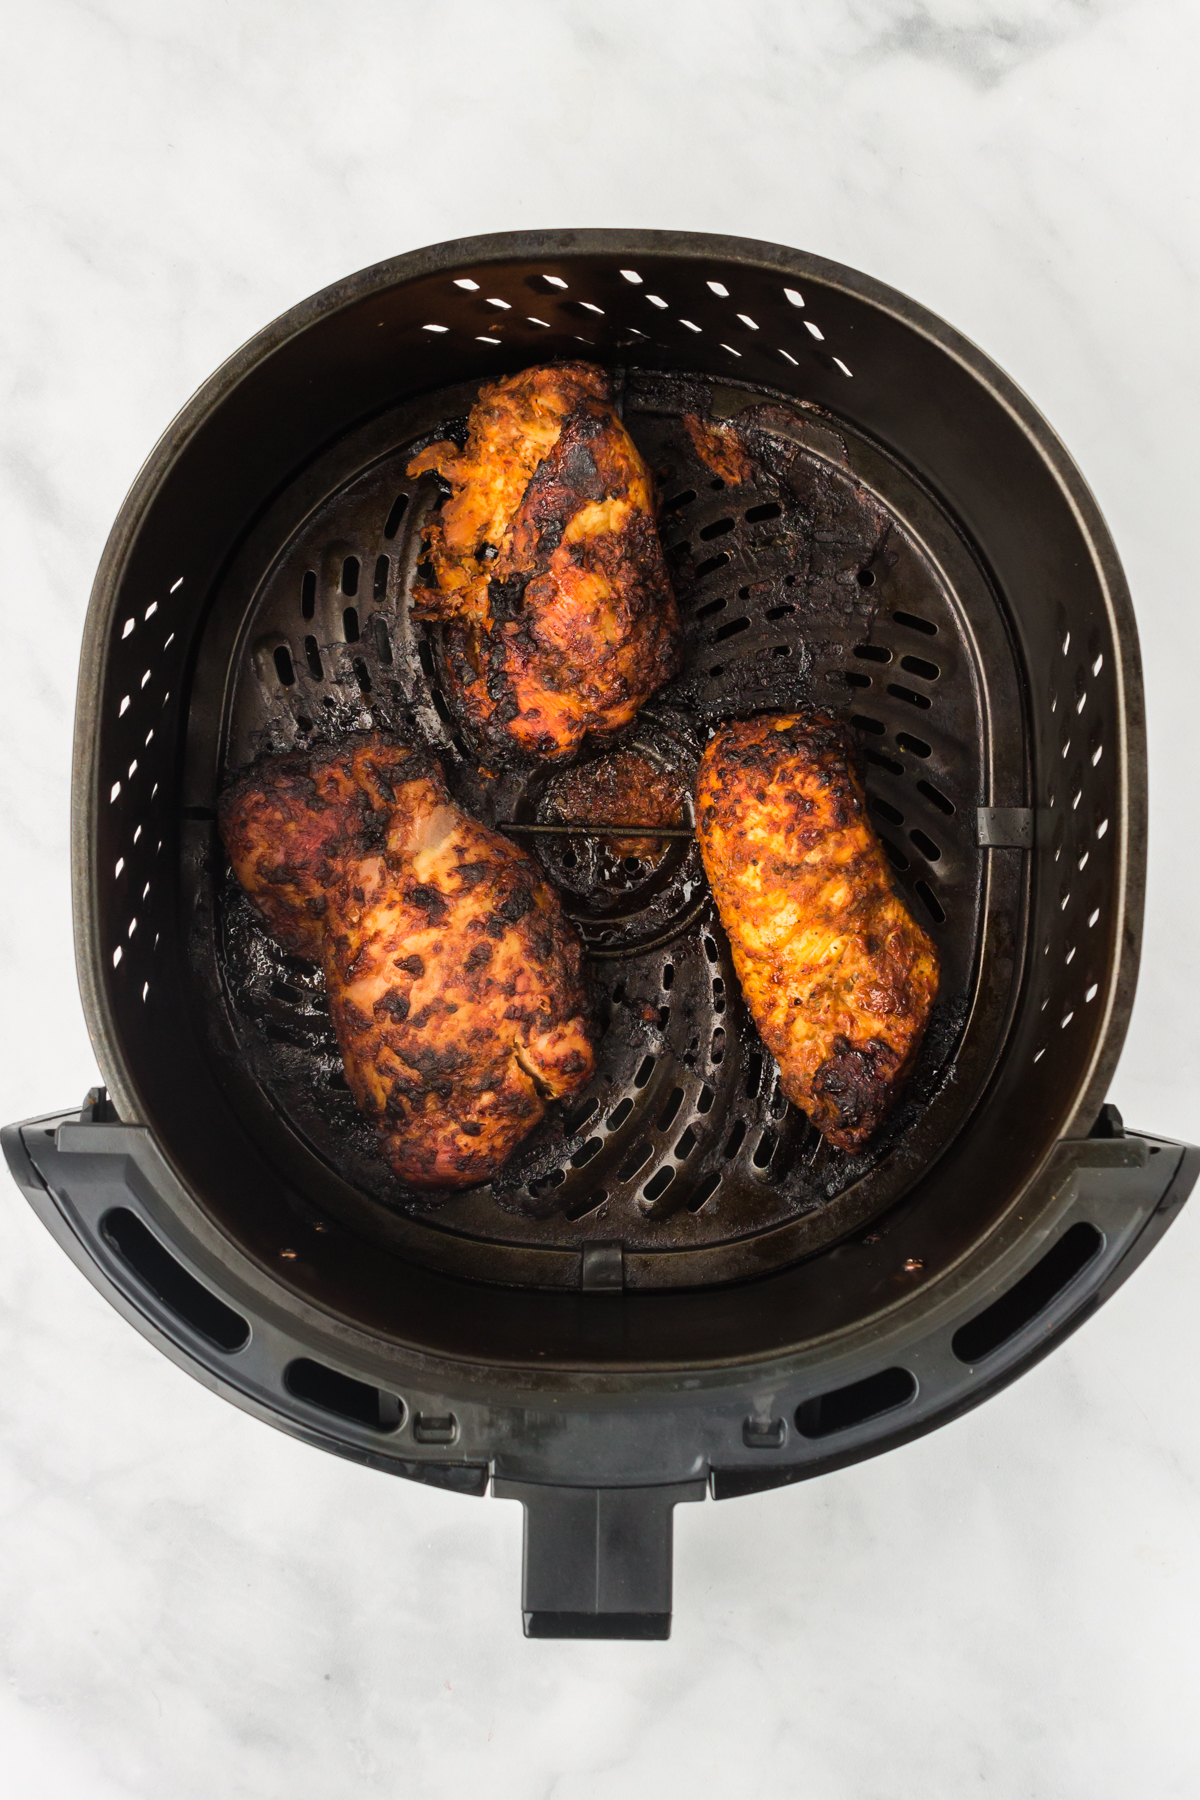 chipotle chicken that has been cooked in the air fryer